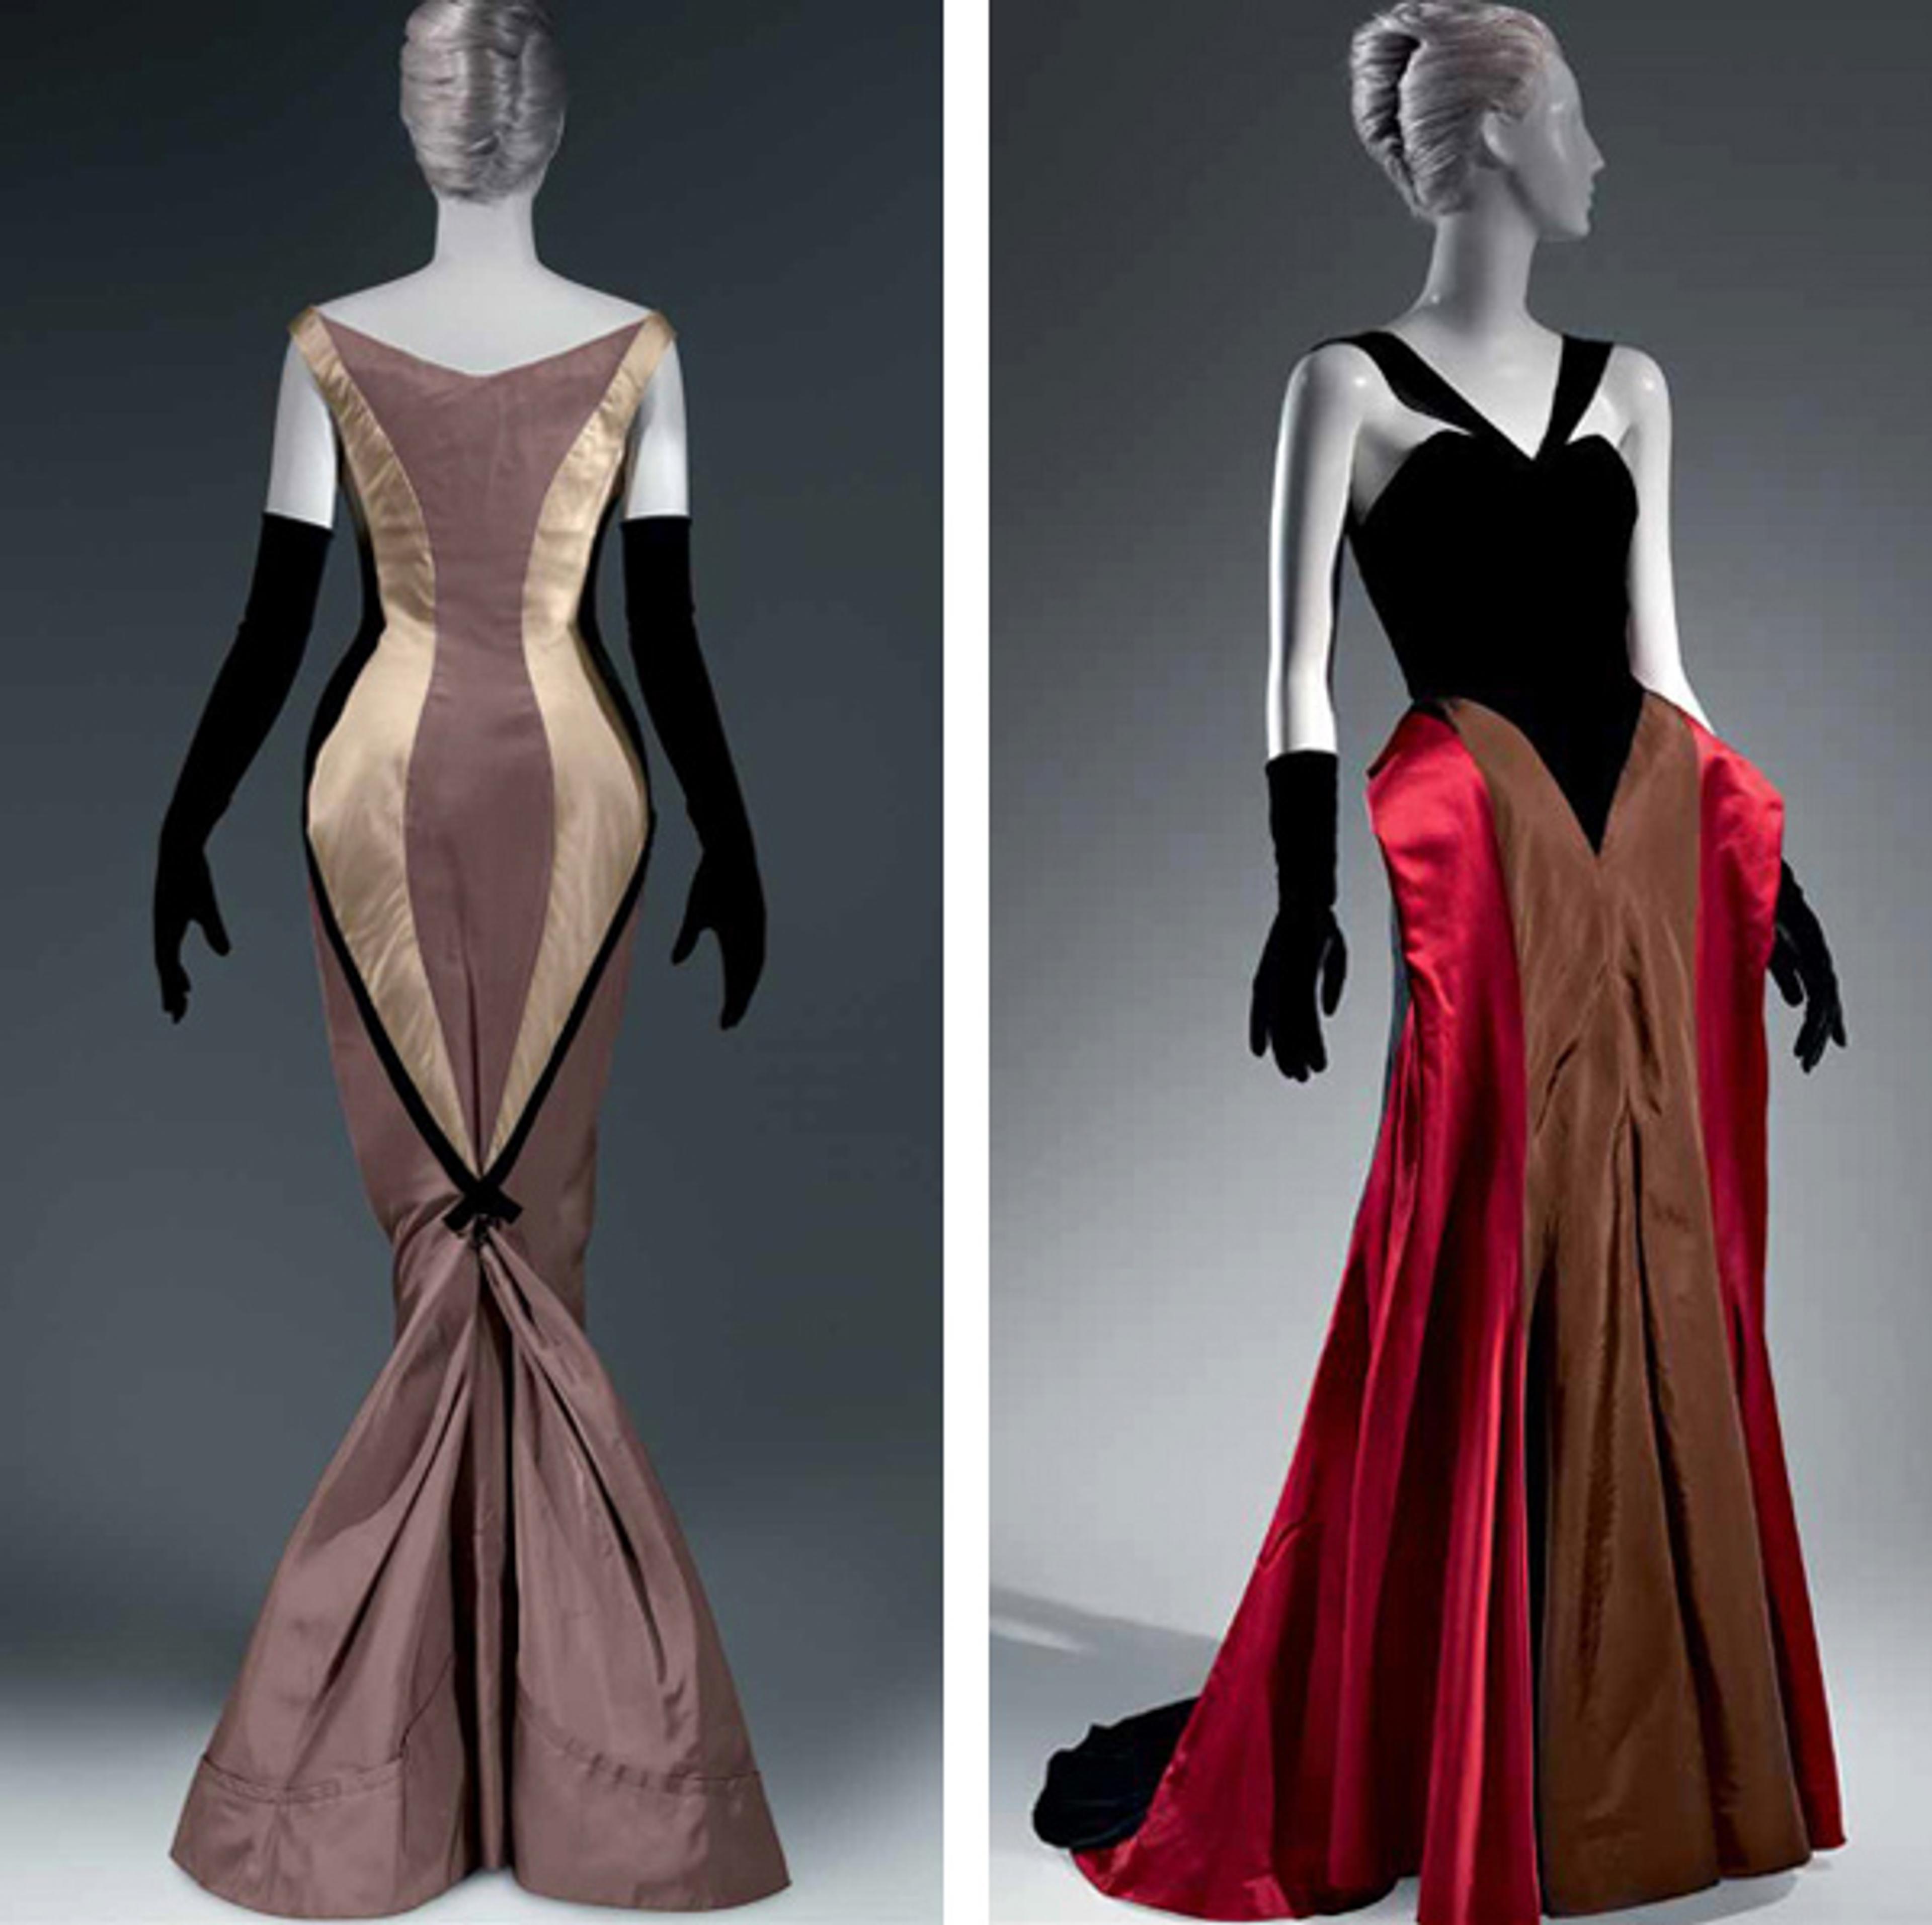 Photographs of the "Diamond" evening dress and "Ball Gown" by Charles James